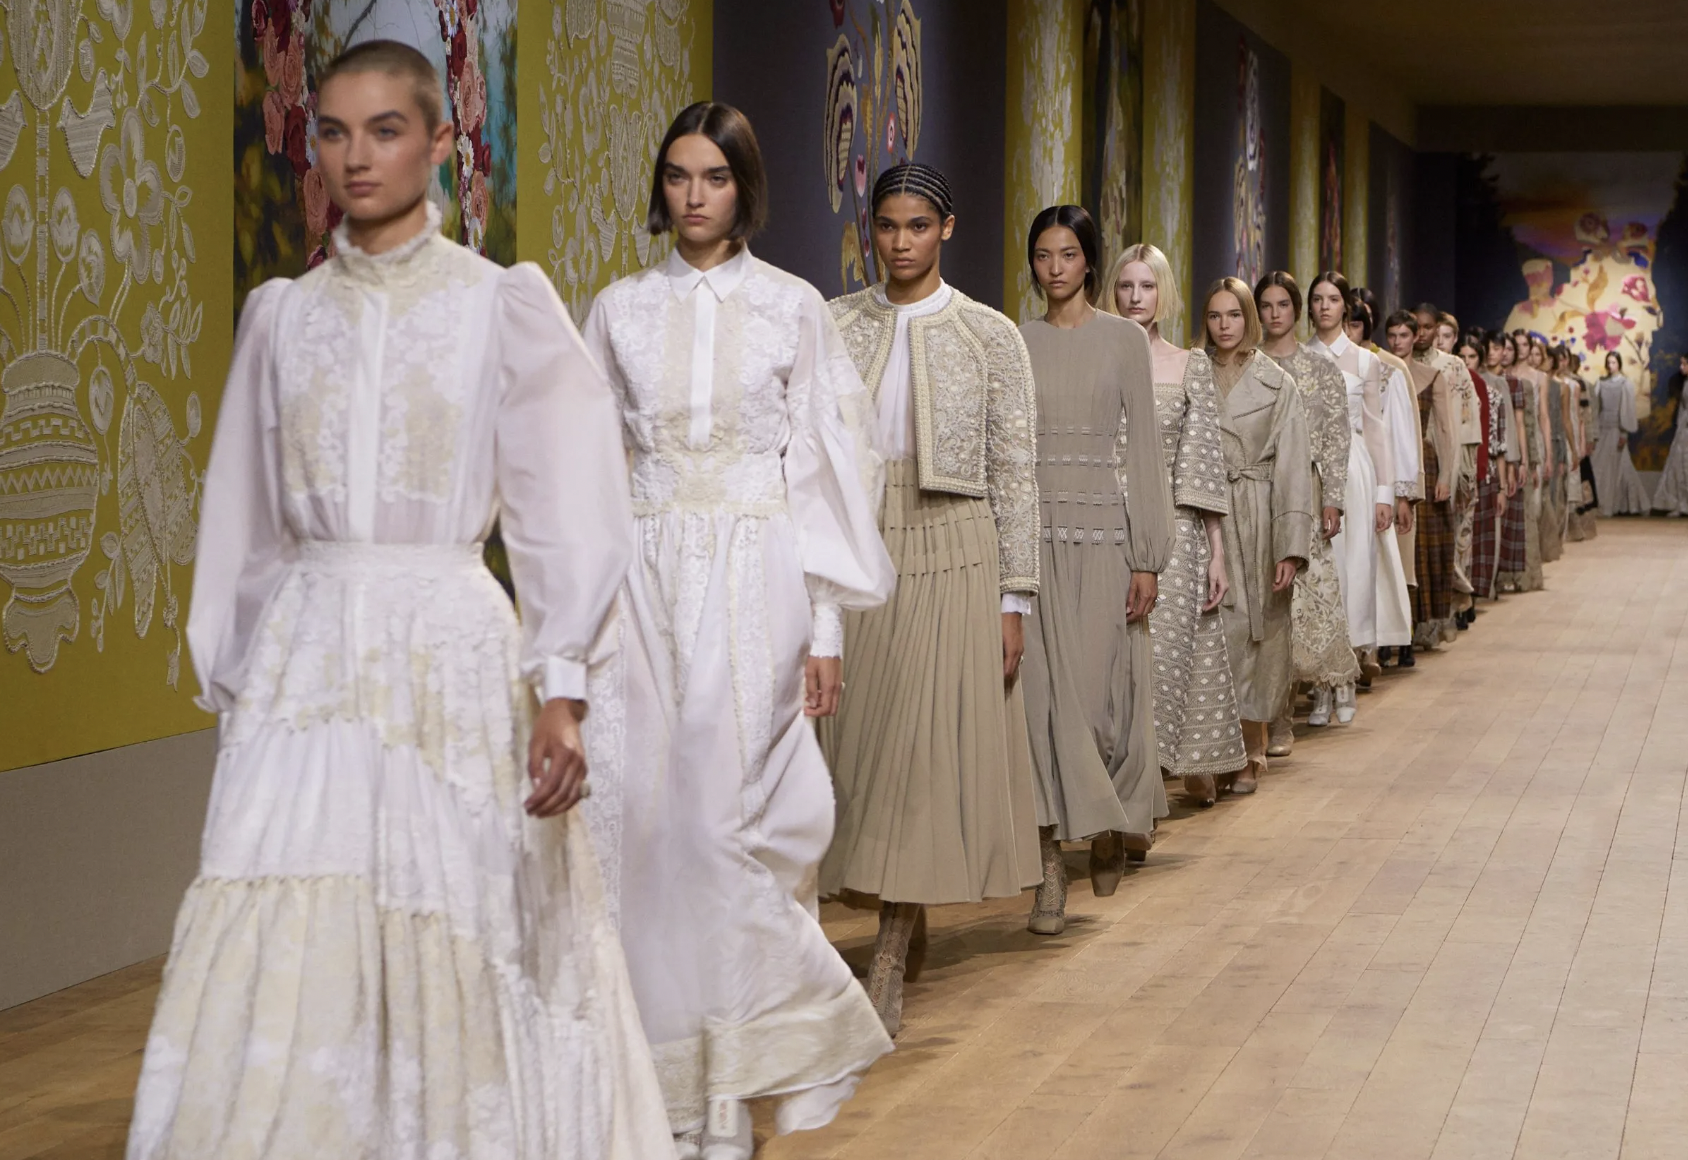 Chanakya, an Indian fashion house, and Dior collaborated to create the Couture A/W 2022-2023 collection